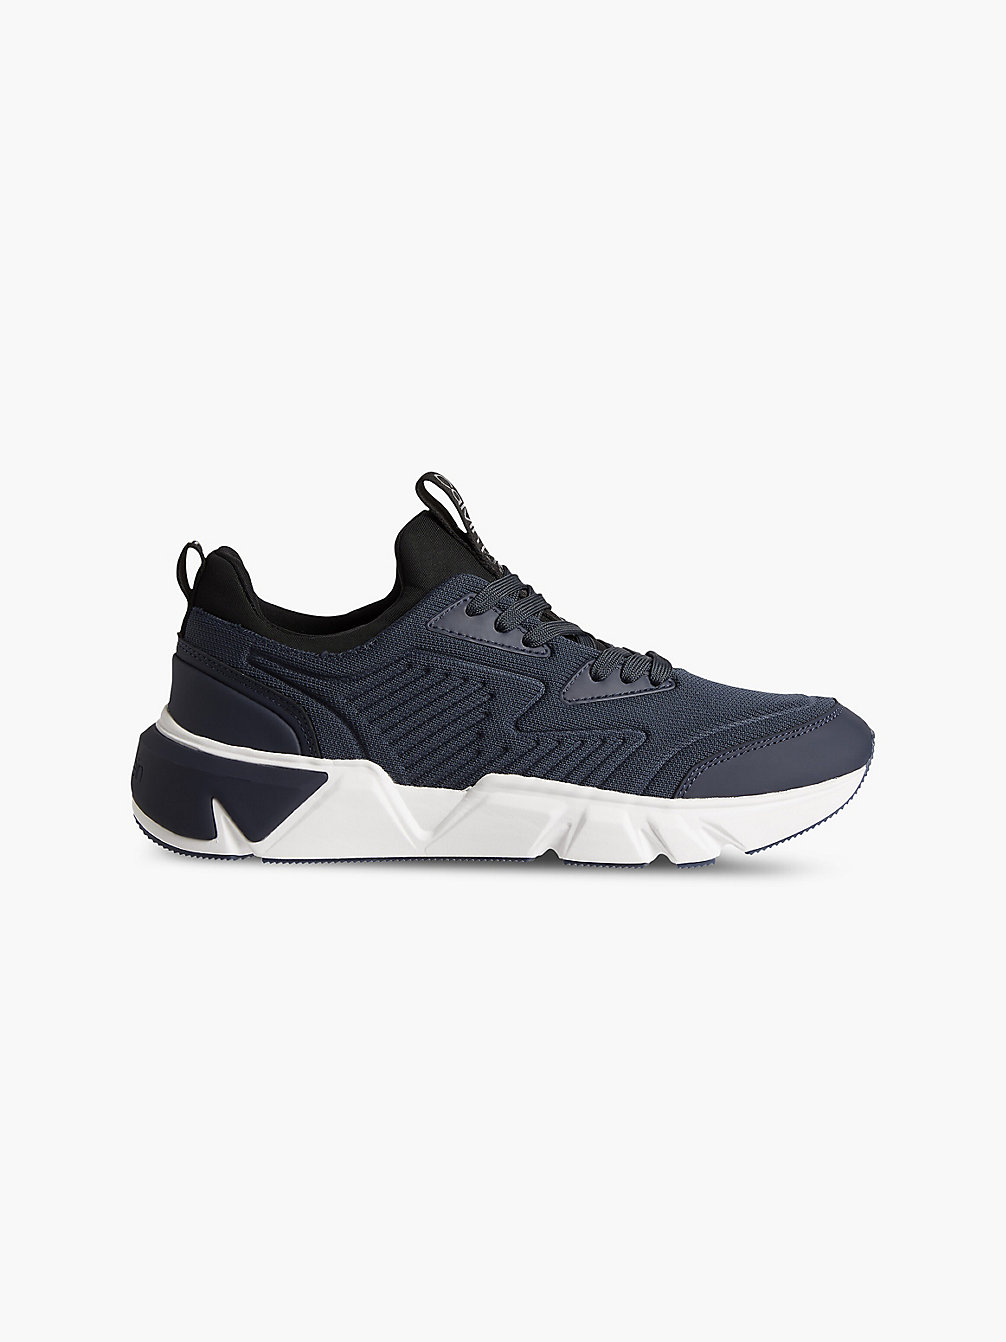 CALVIN NAVY Recycled Knit Trainers undefined men Calvin Klein